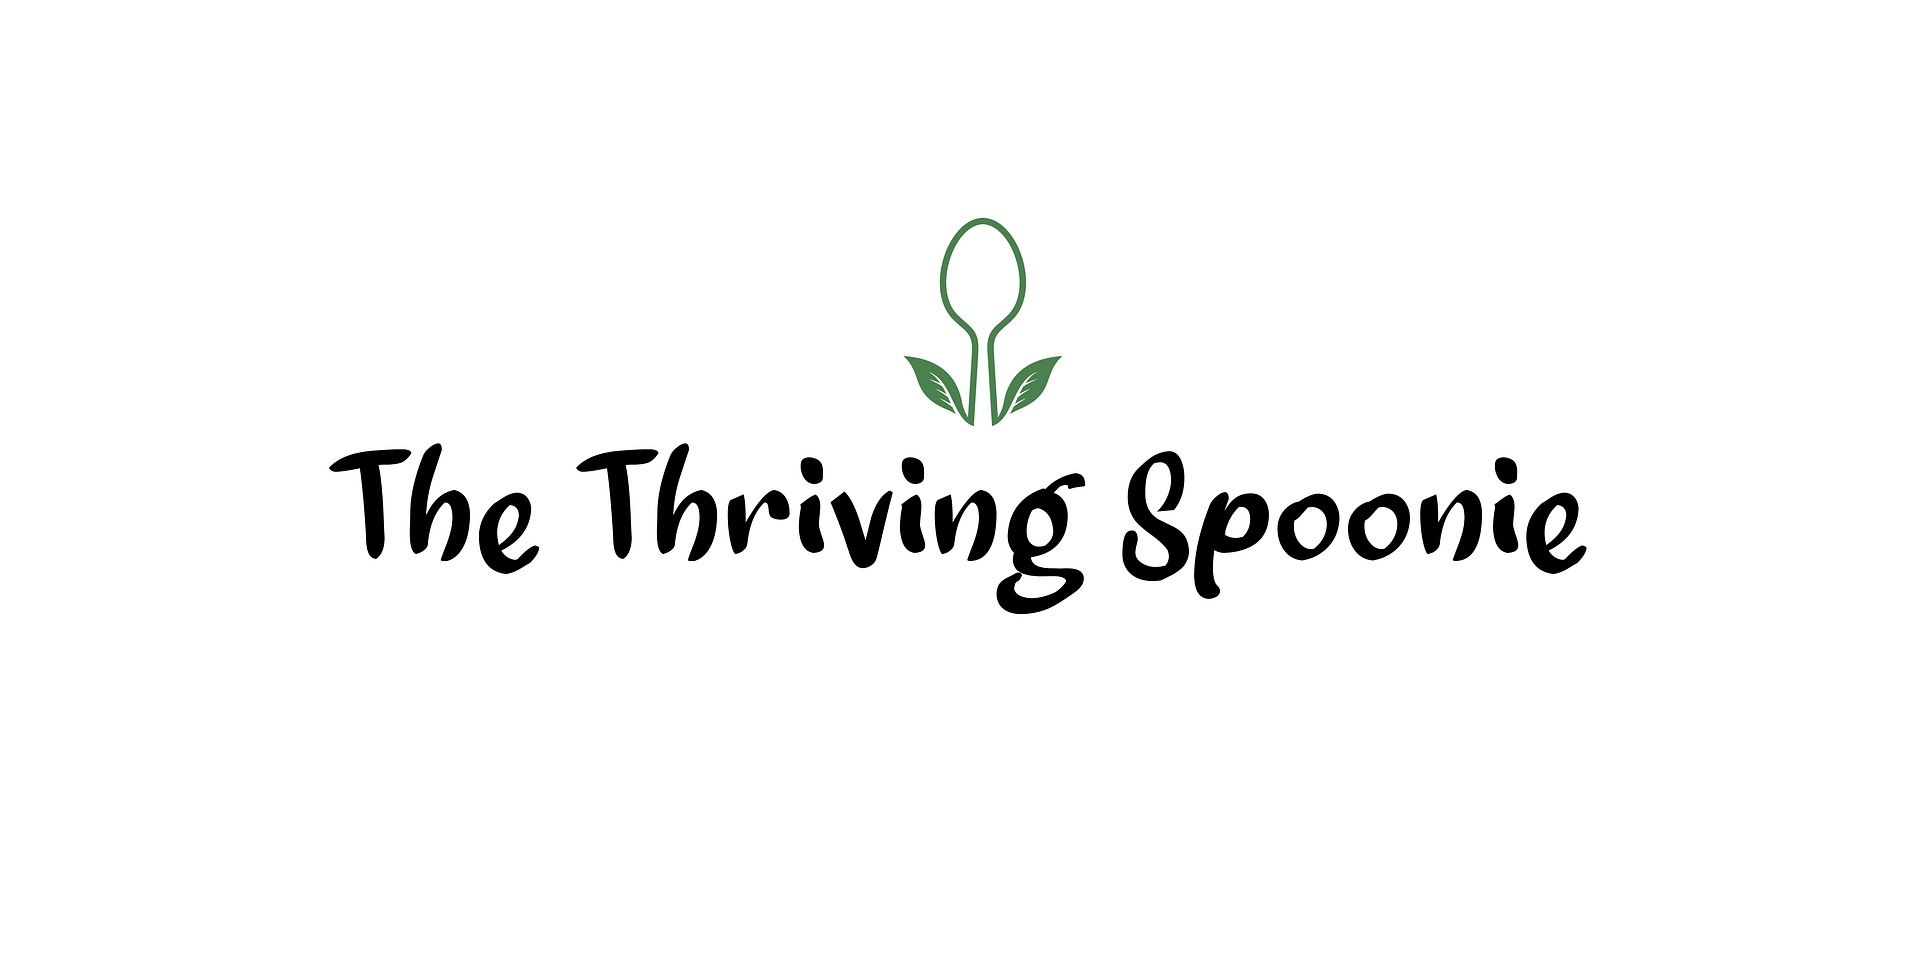 The Thriving Spoonie